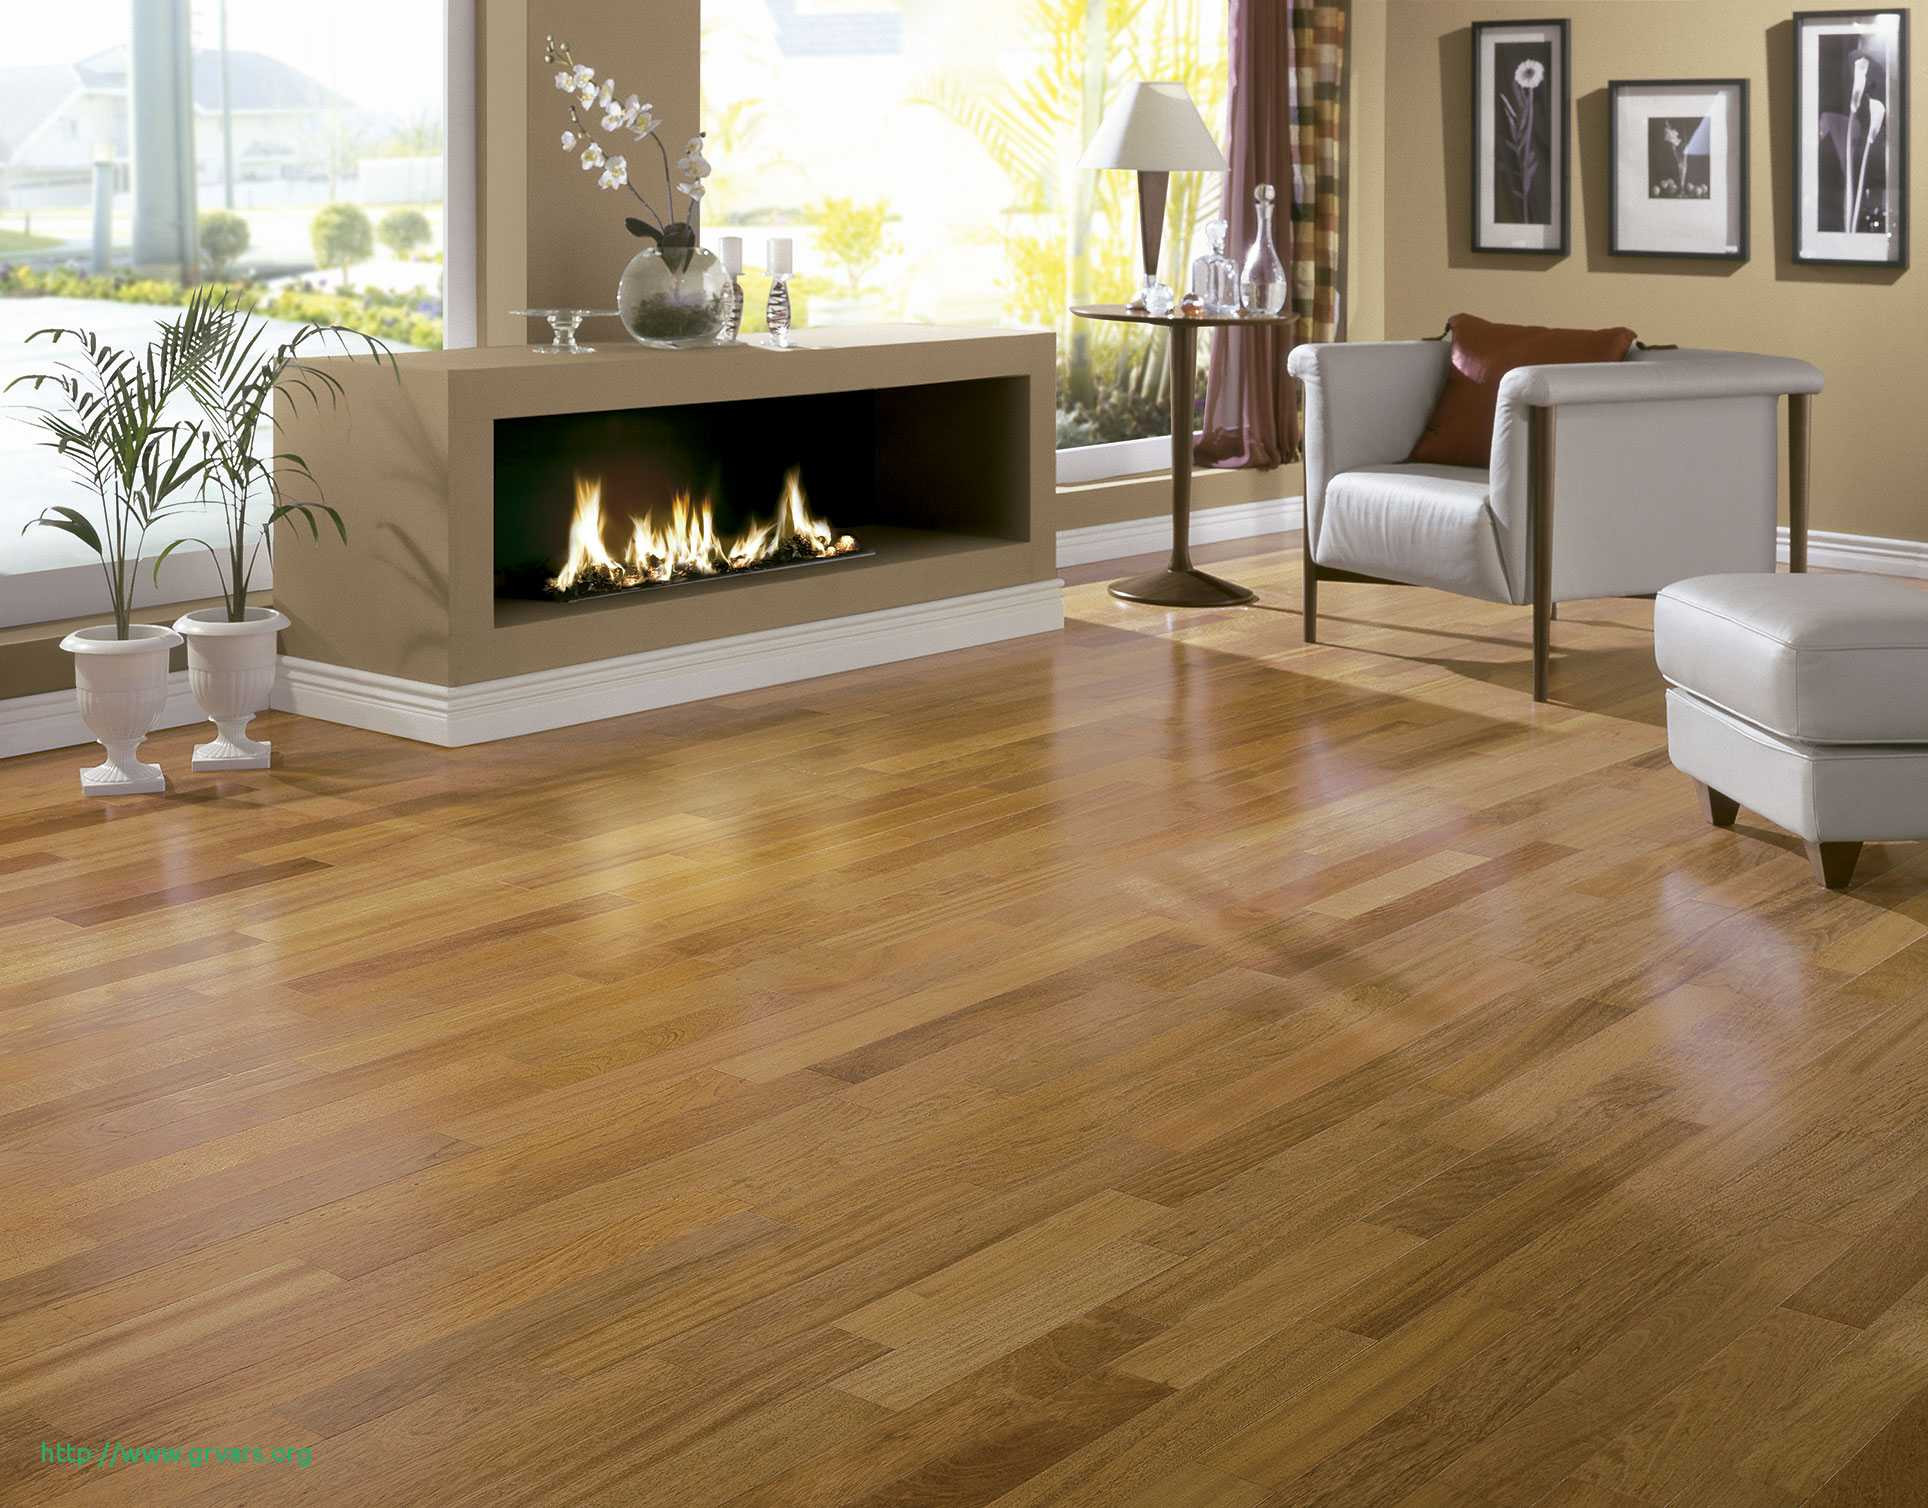 hardwood floor fireplace transition of difference in hardwood floors charmant engaging discount hardwood with difference in hardwood floors charmant engaging discount hardwood flooring 5 whe